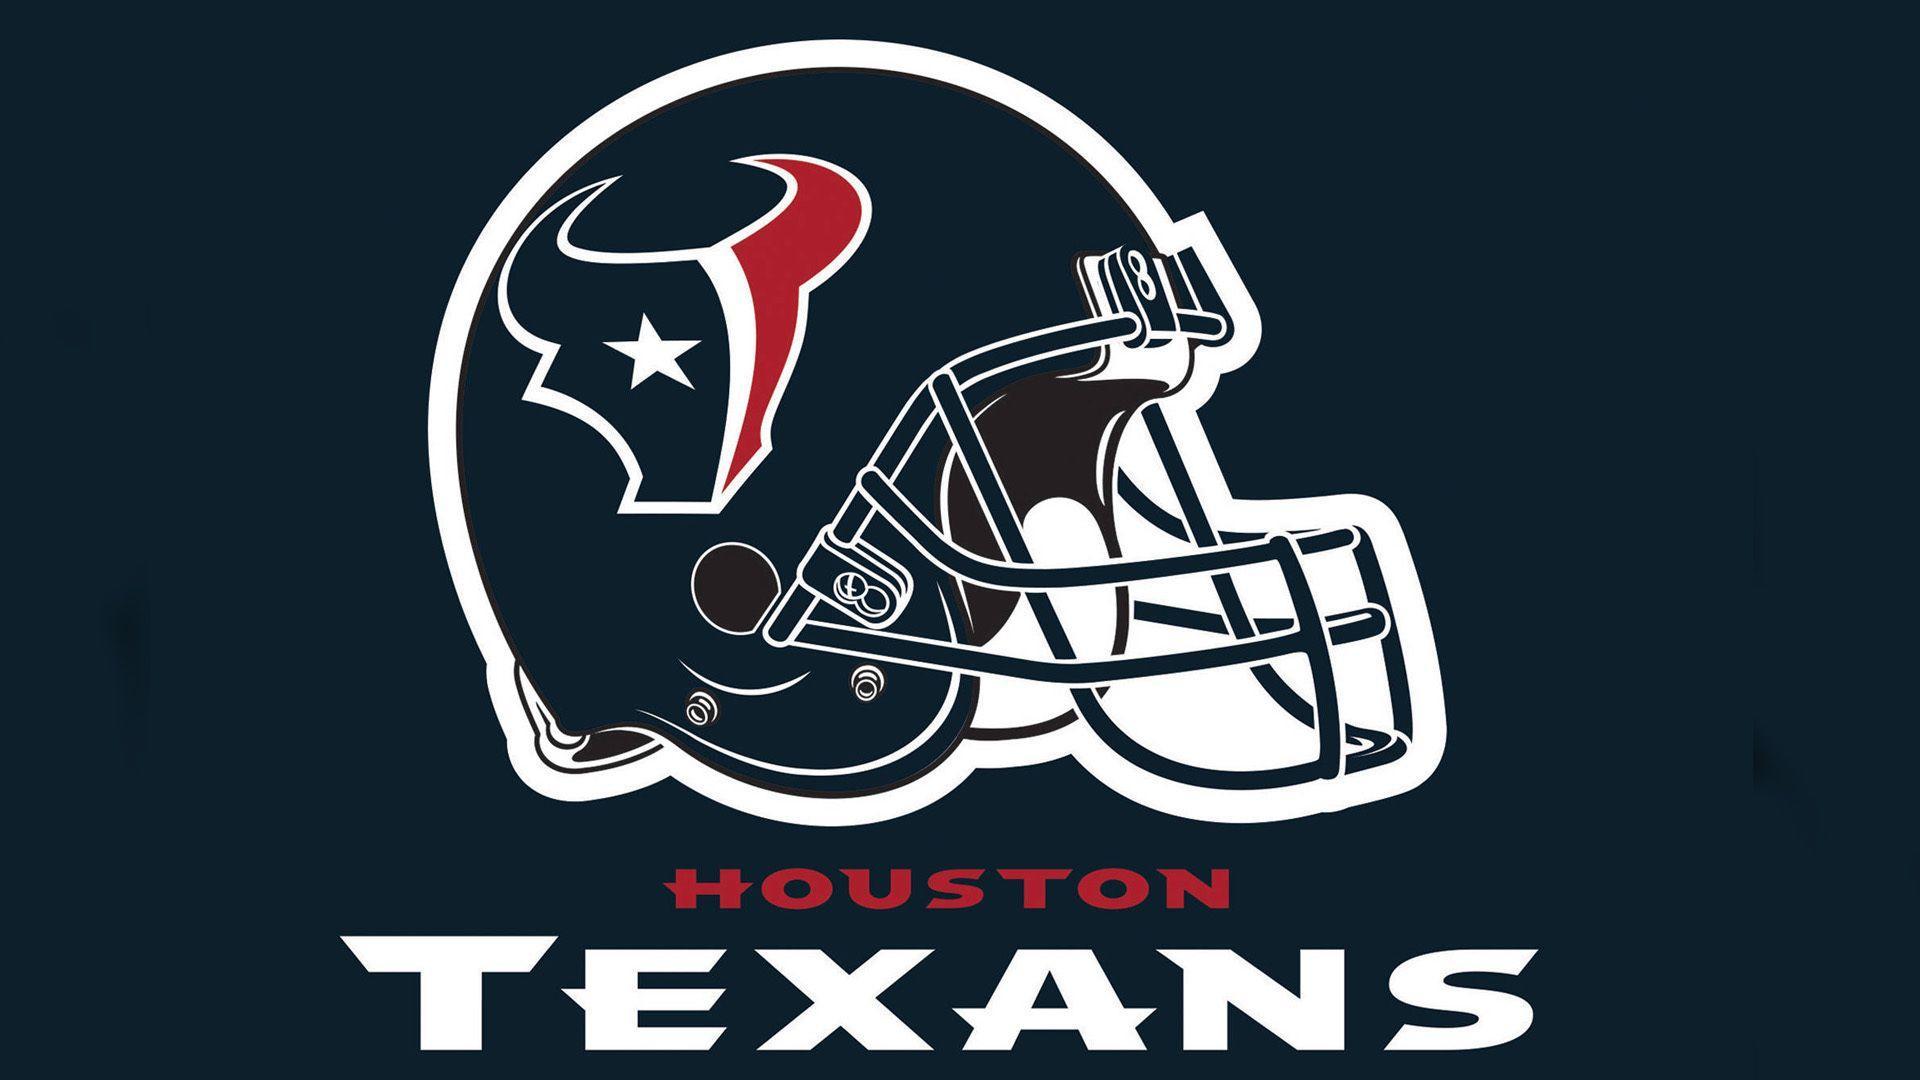 Houston Texans Wallpaper Image Photo Picture Background